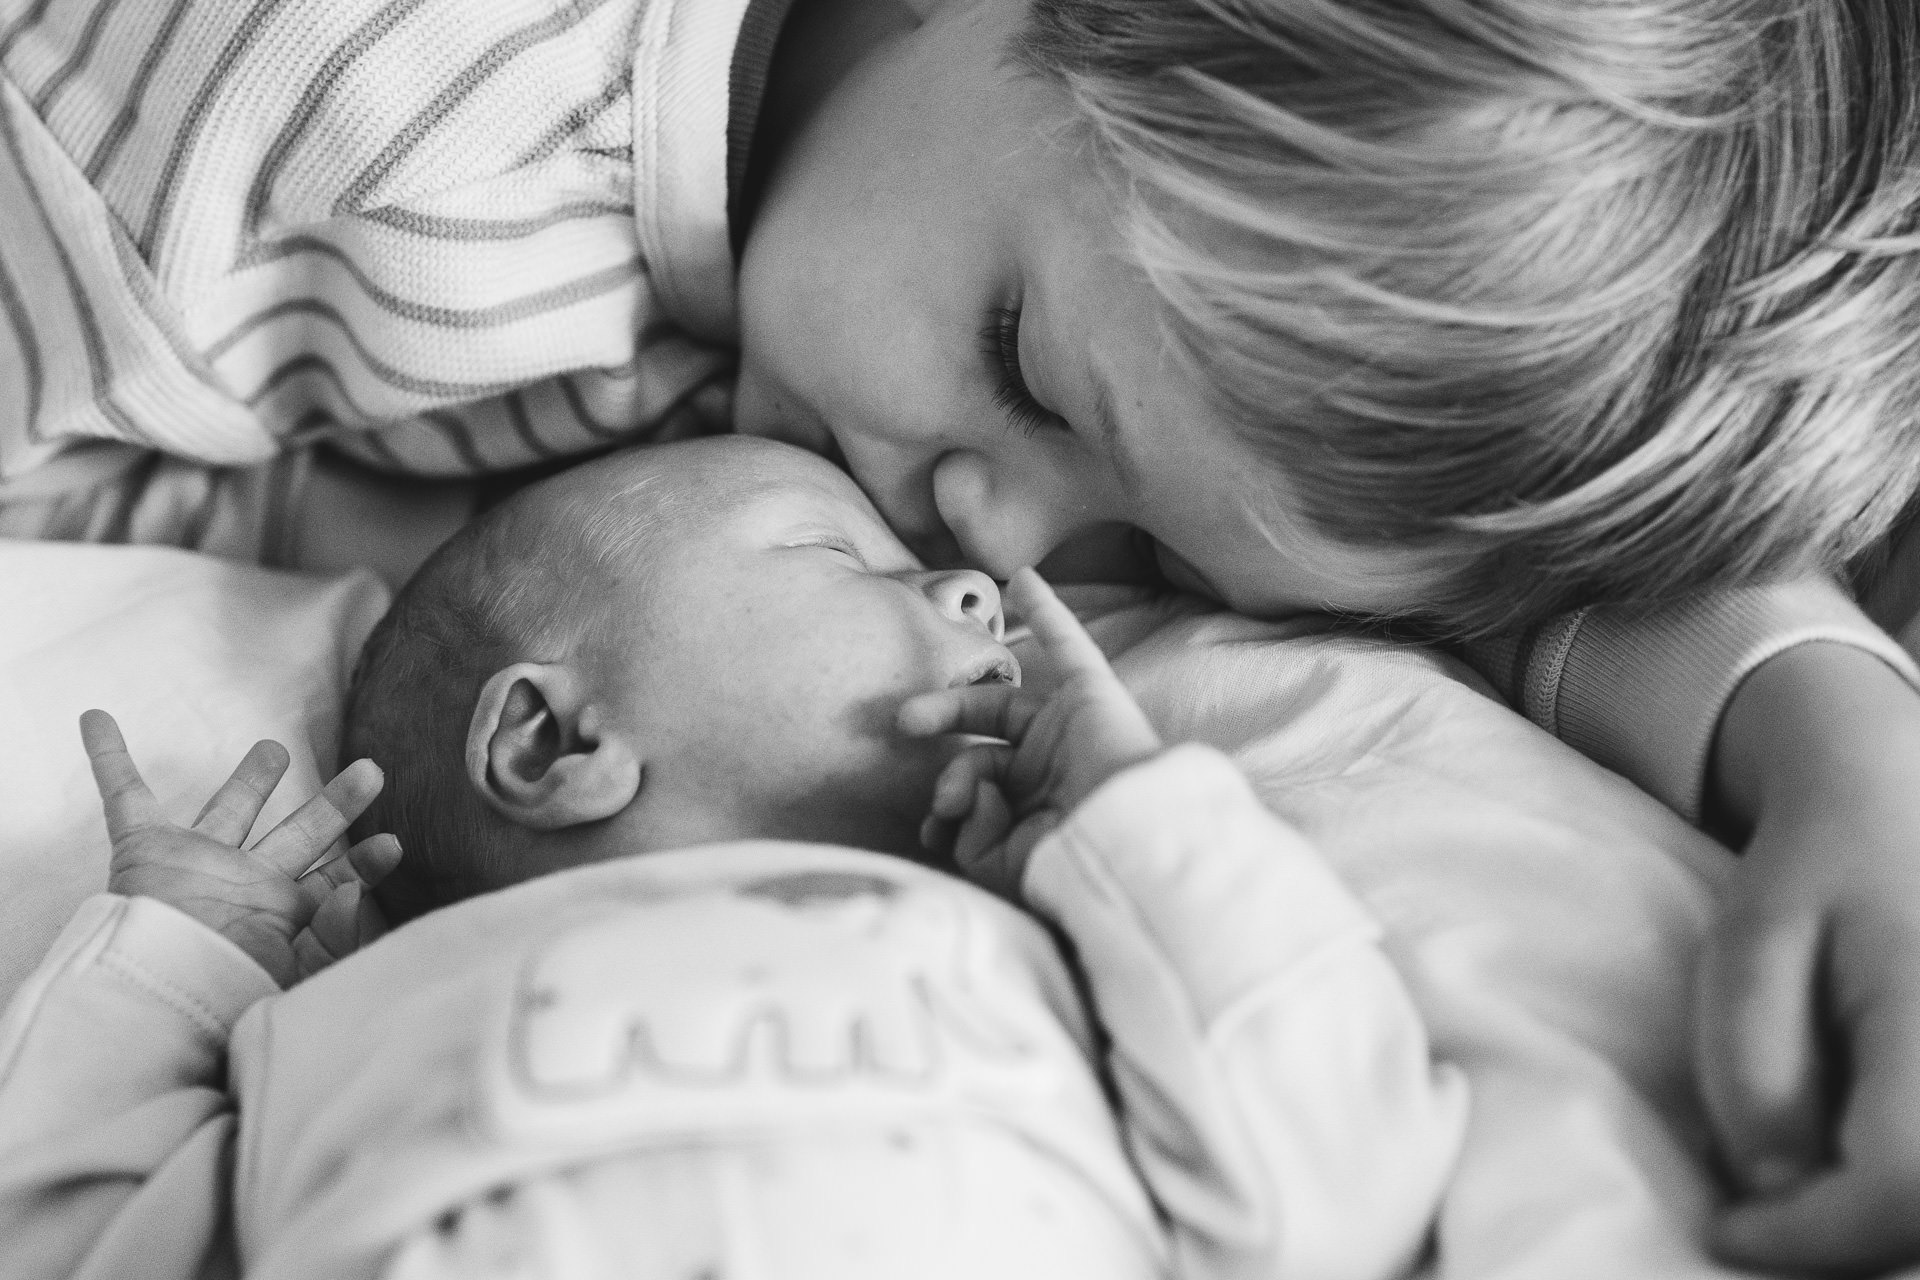 A young boy snuggling up to a baby in a Devon newborn photo session 